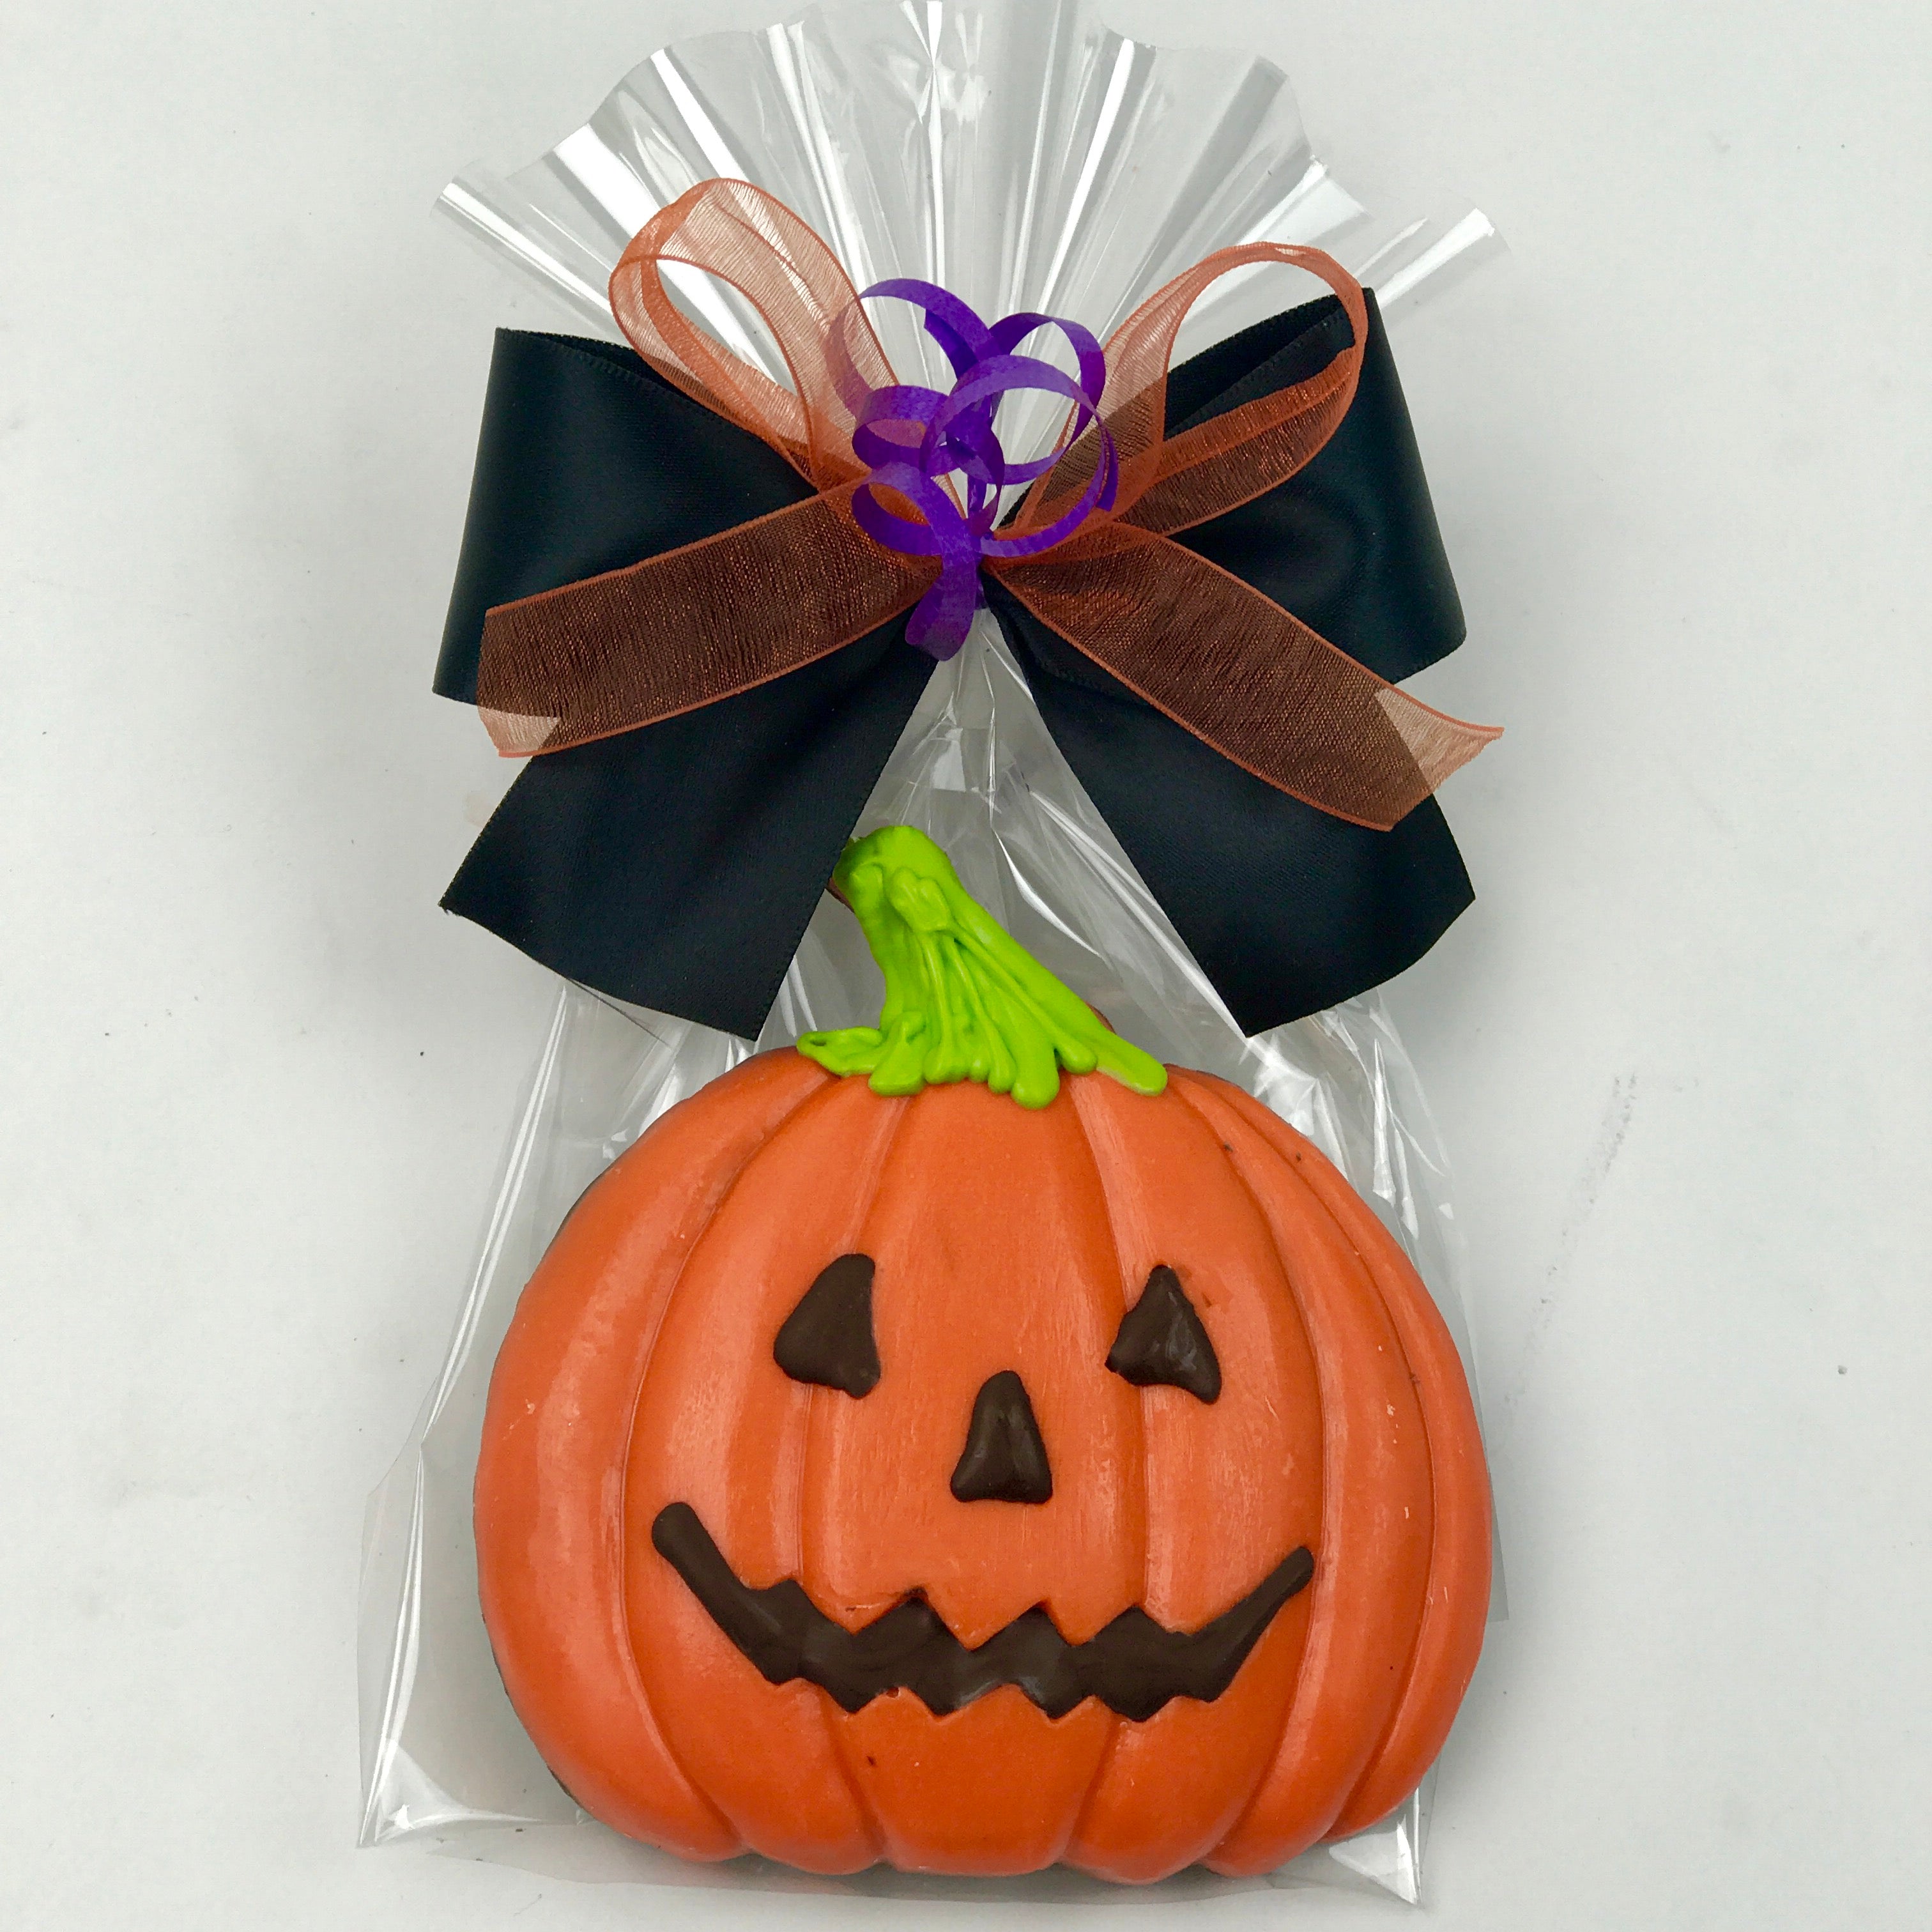 Pumpkin Crispy wrapped in cellophane with a ribbon